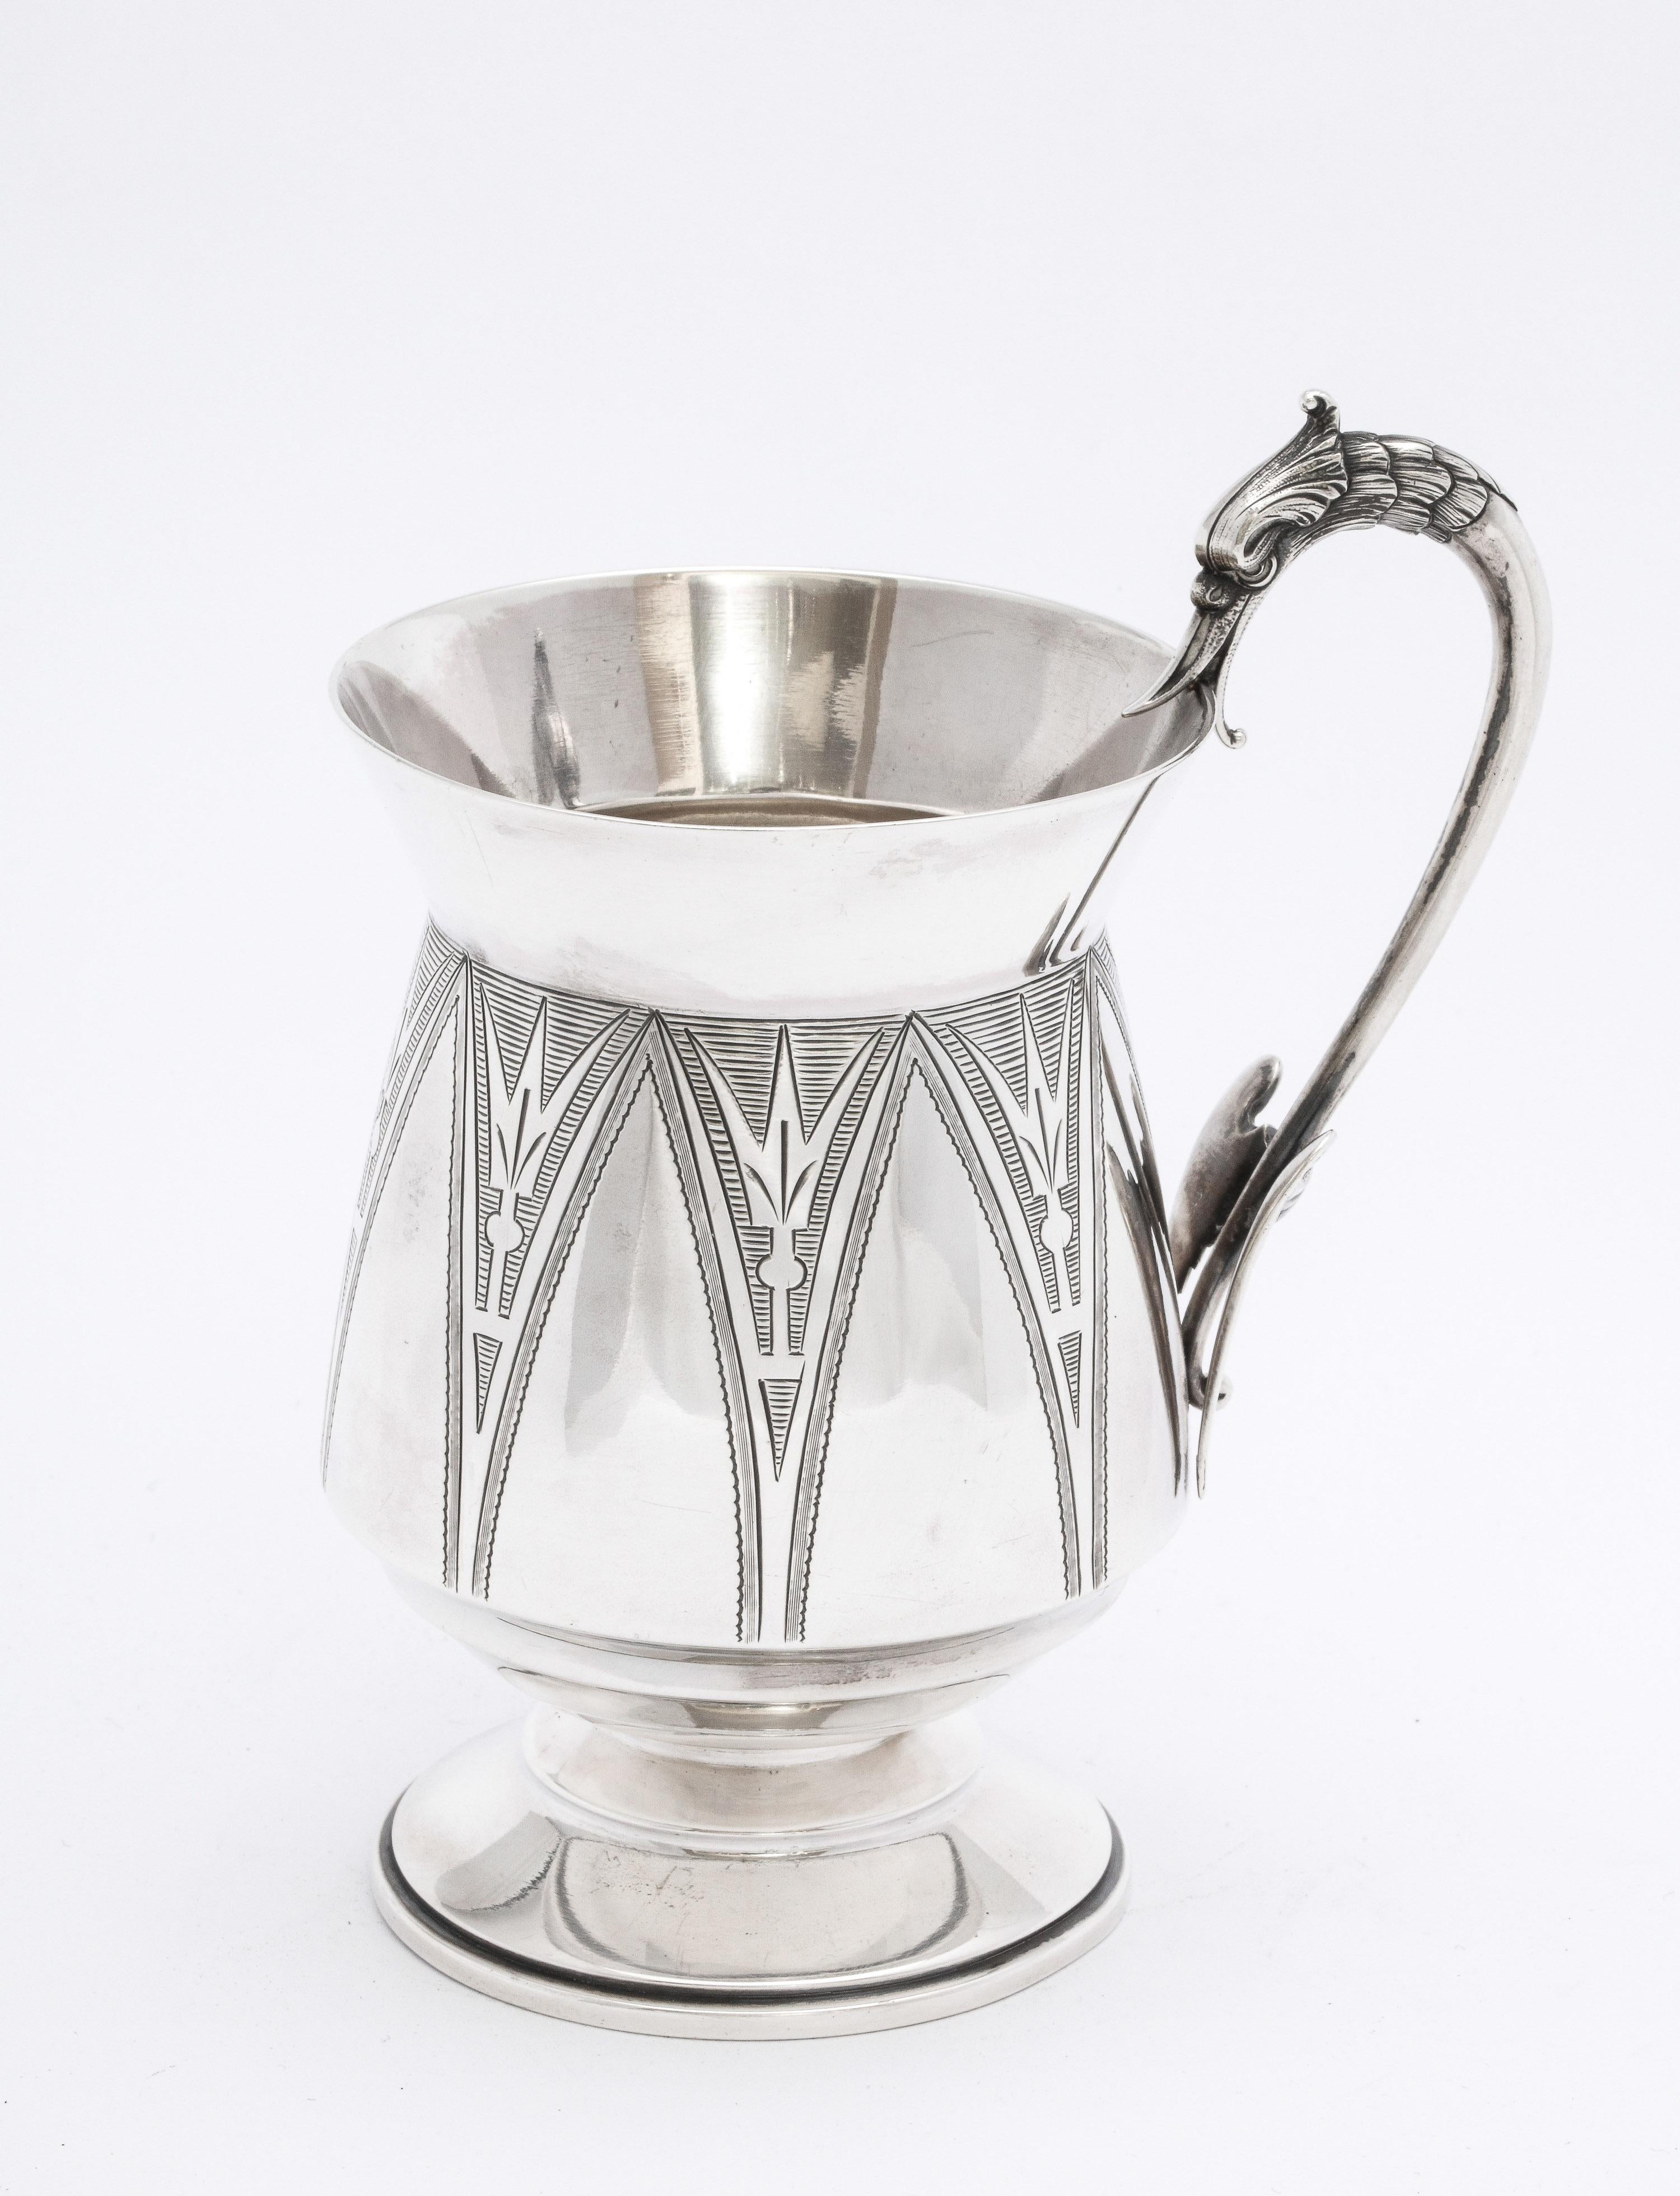 Sterling silver Aesthetic Movement mug/cup on pedestal base, New York, Ca. 1875, Wood and Hughes - makers. Lovely etched designs on mug. Handle is in the form of a swan (its long neck being the hand-hold) holding the top of the cup in its mouth. The